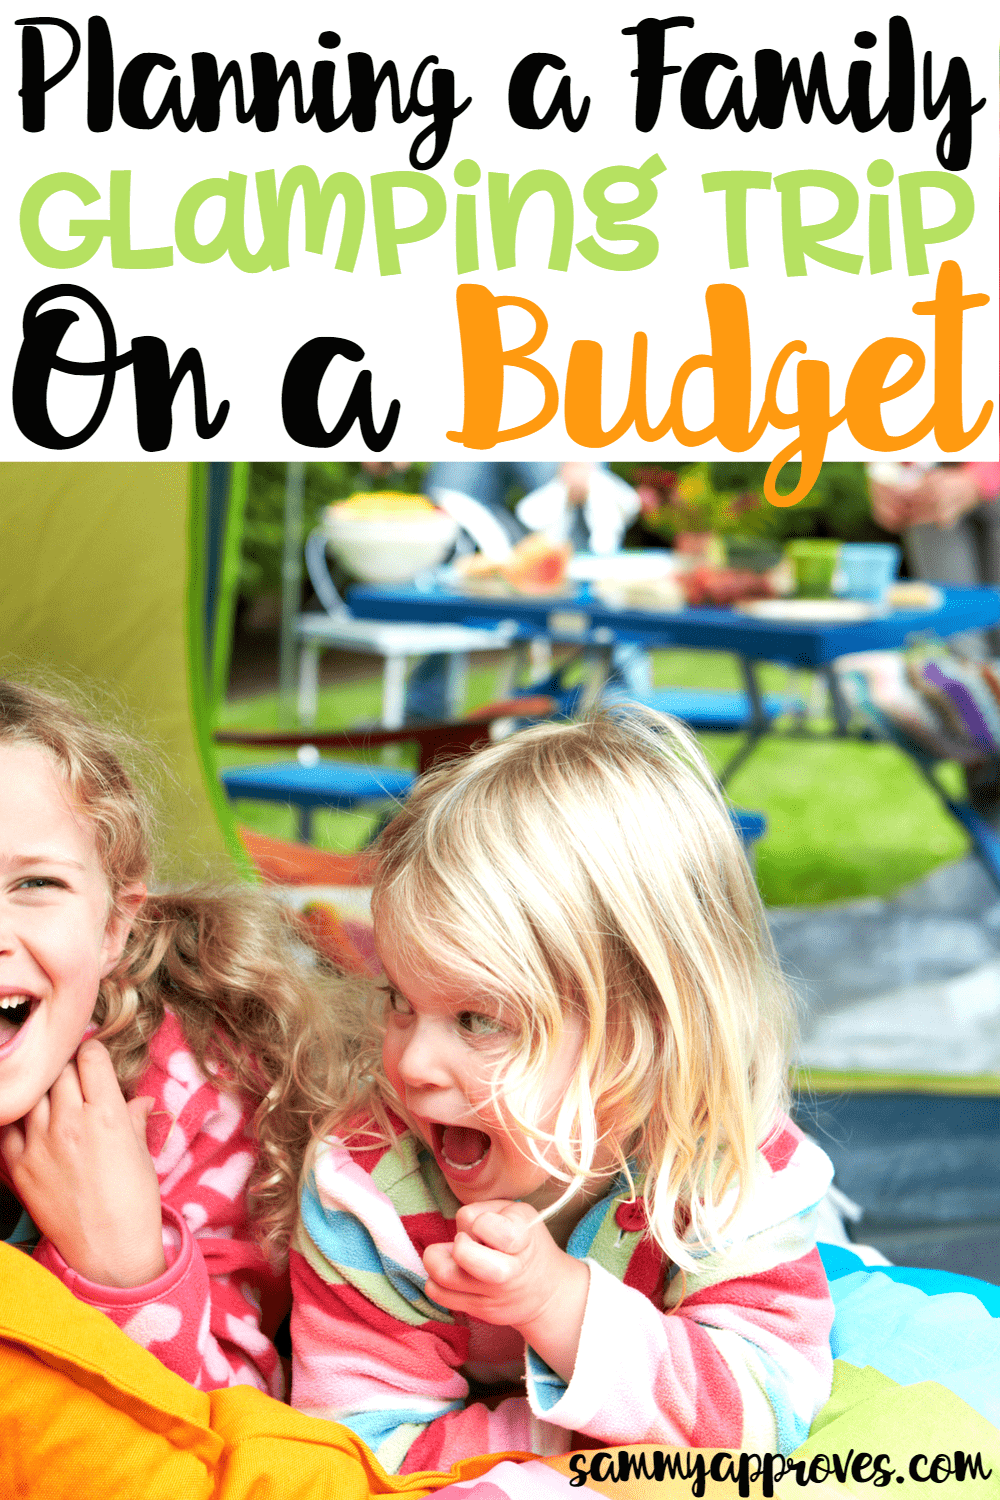 How to Plan a Family Glamping Trip on a Budget | Camp with Comfort!